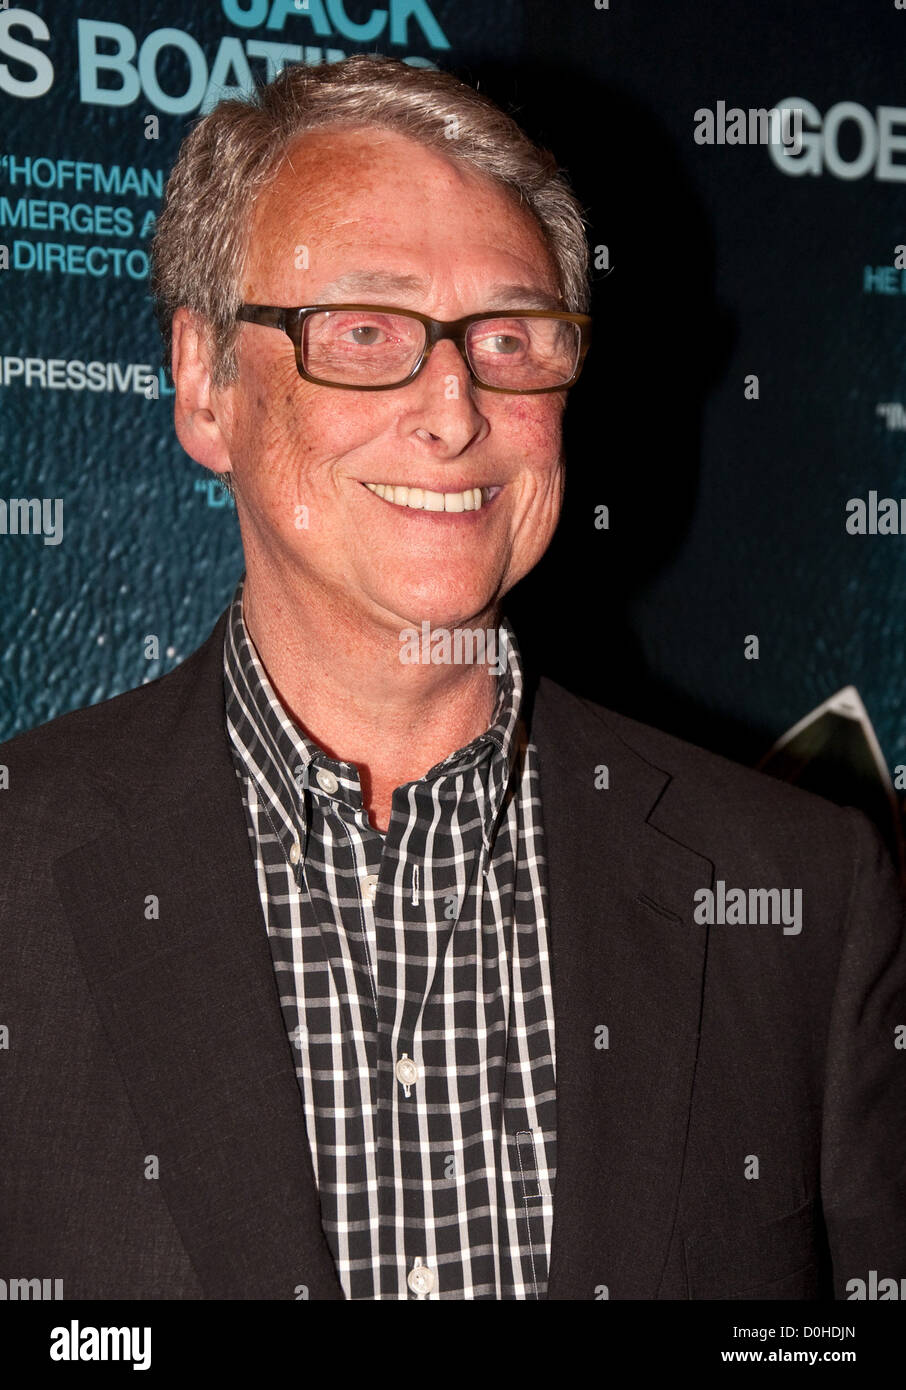 Mike Nichols The New York Premiere of 'Jack Goes Boating' at the Paris Theater - Arrivals New York City, USA - 16.09.10 Stock Photo